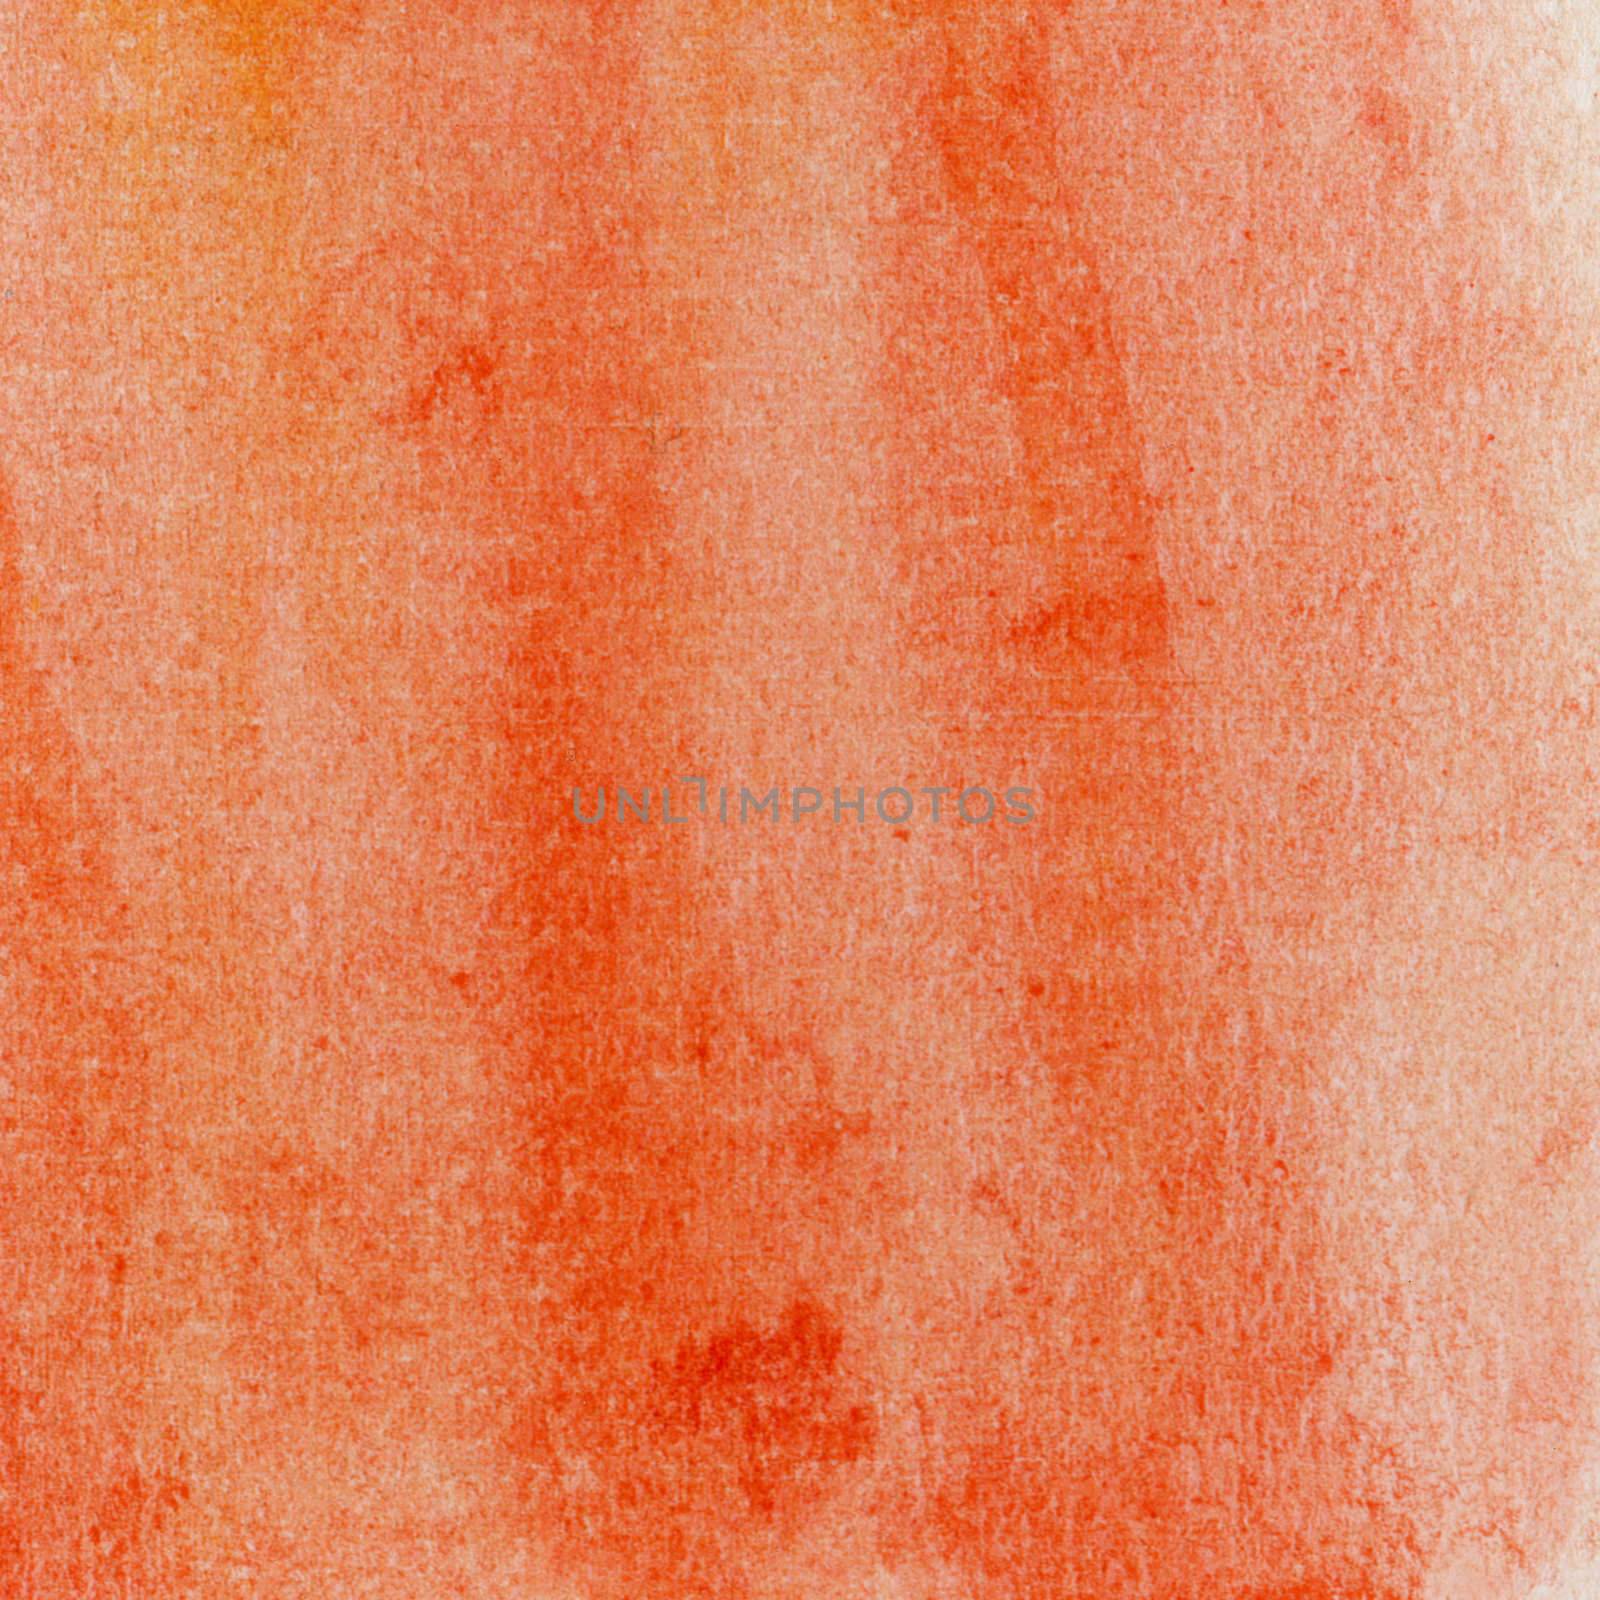 red and orange grunge painted scratched  background by PixelsAway